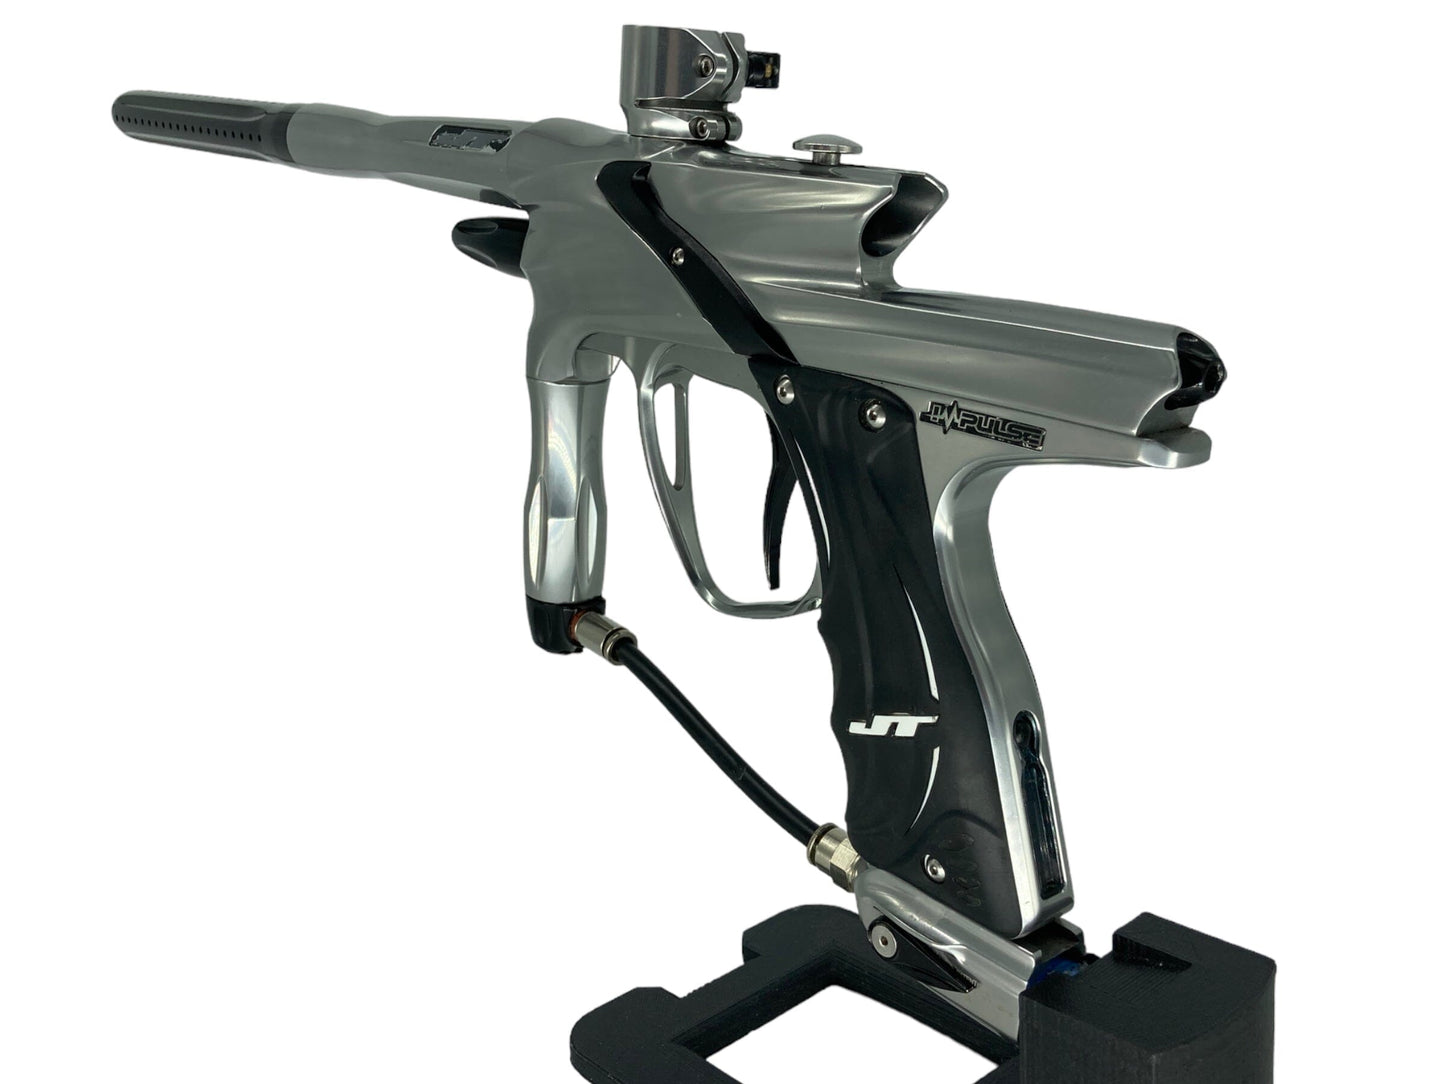 Used JT Impulse Paintball Gun from CPXBrosPaintball Buy/Sell/Trade Paintball Markers, New Paintball Guns, Paintball Hoppers, Paintball Masks, and Hormesis Headbands